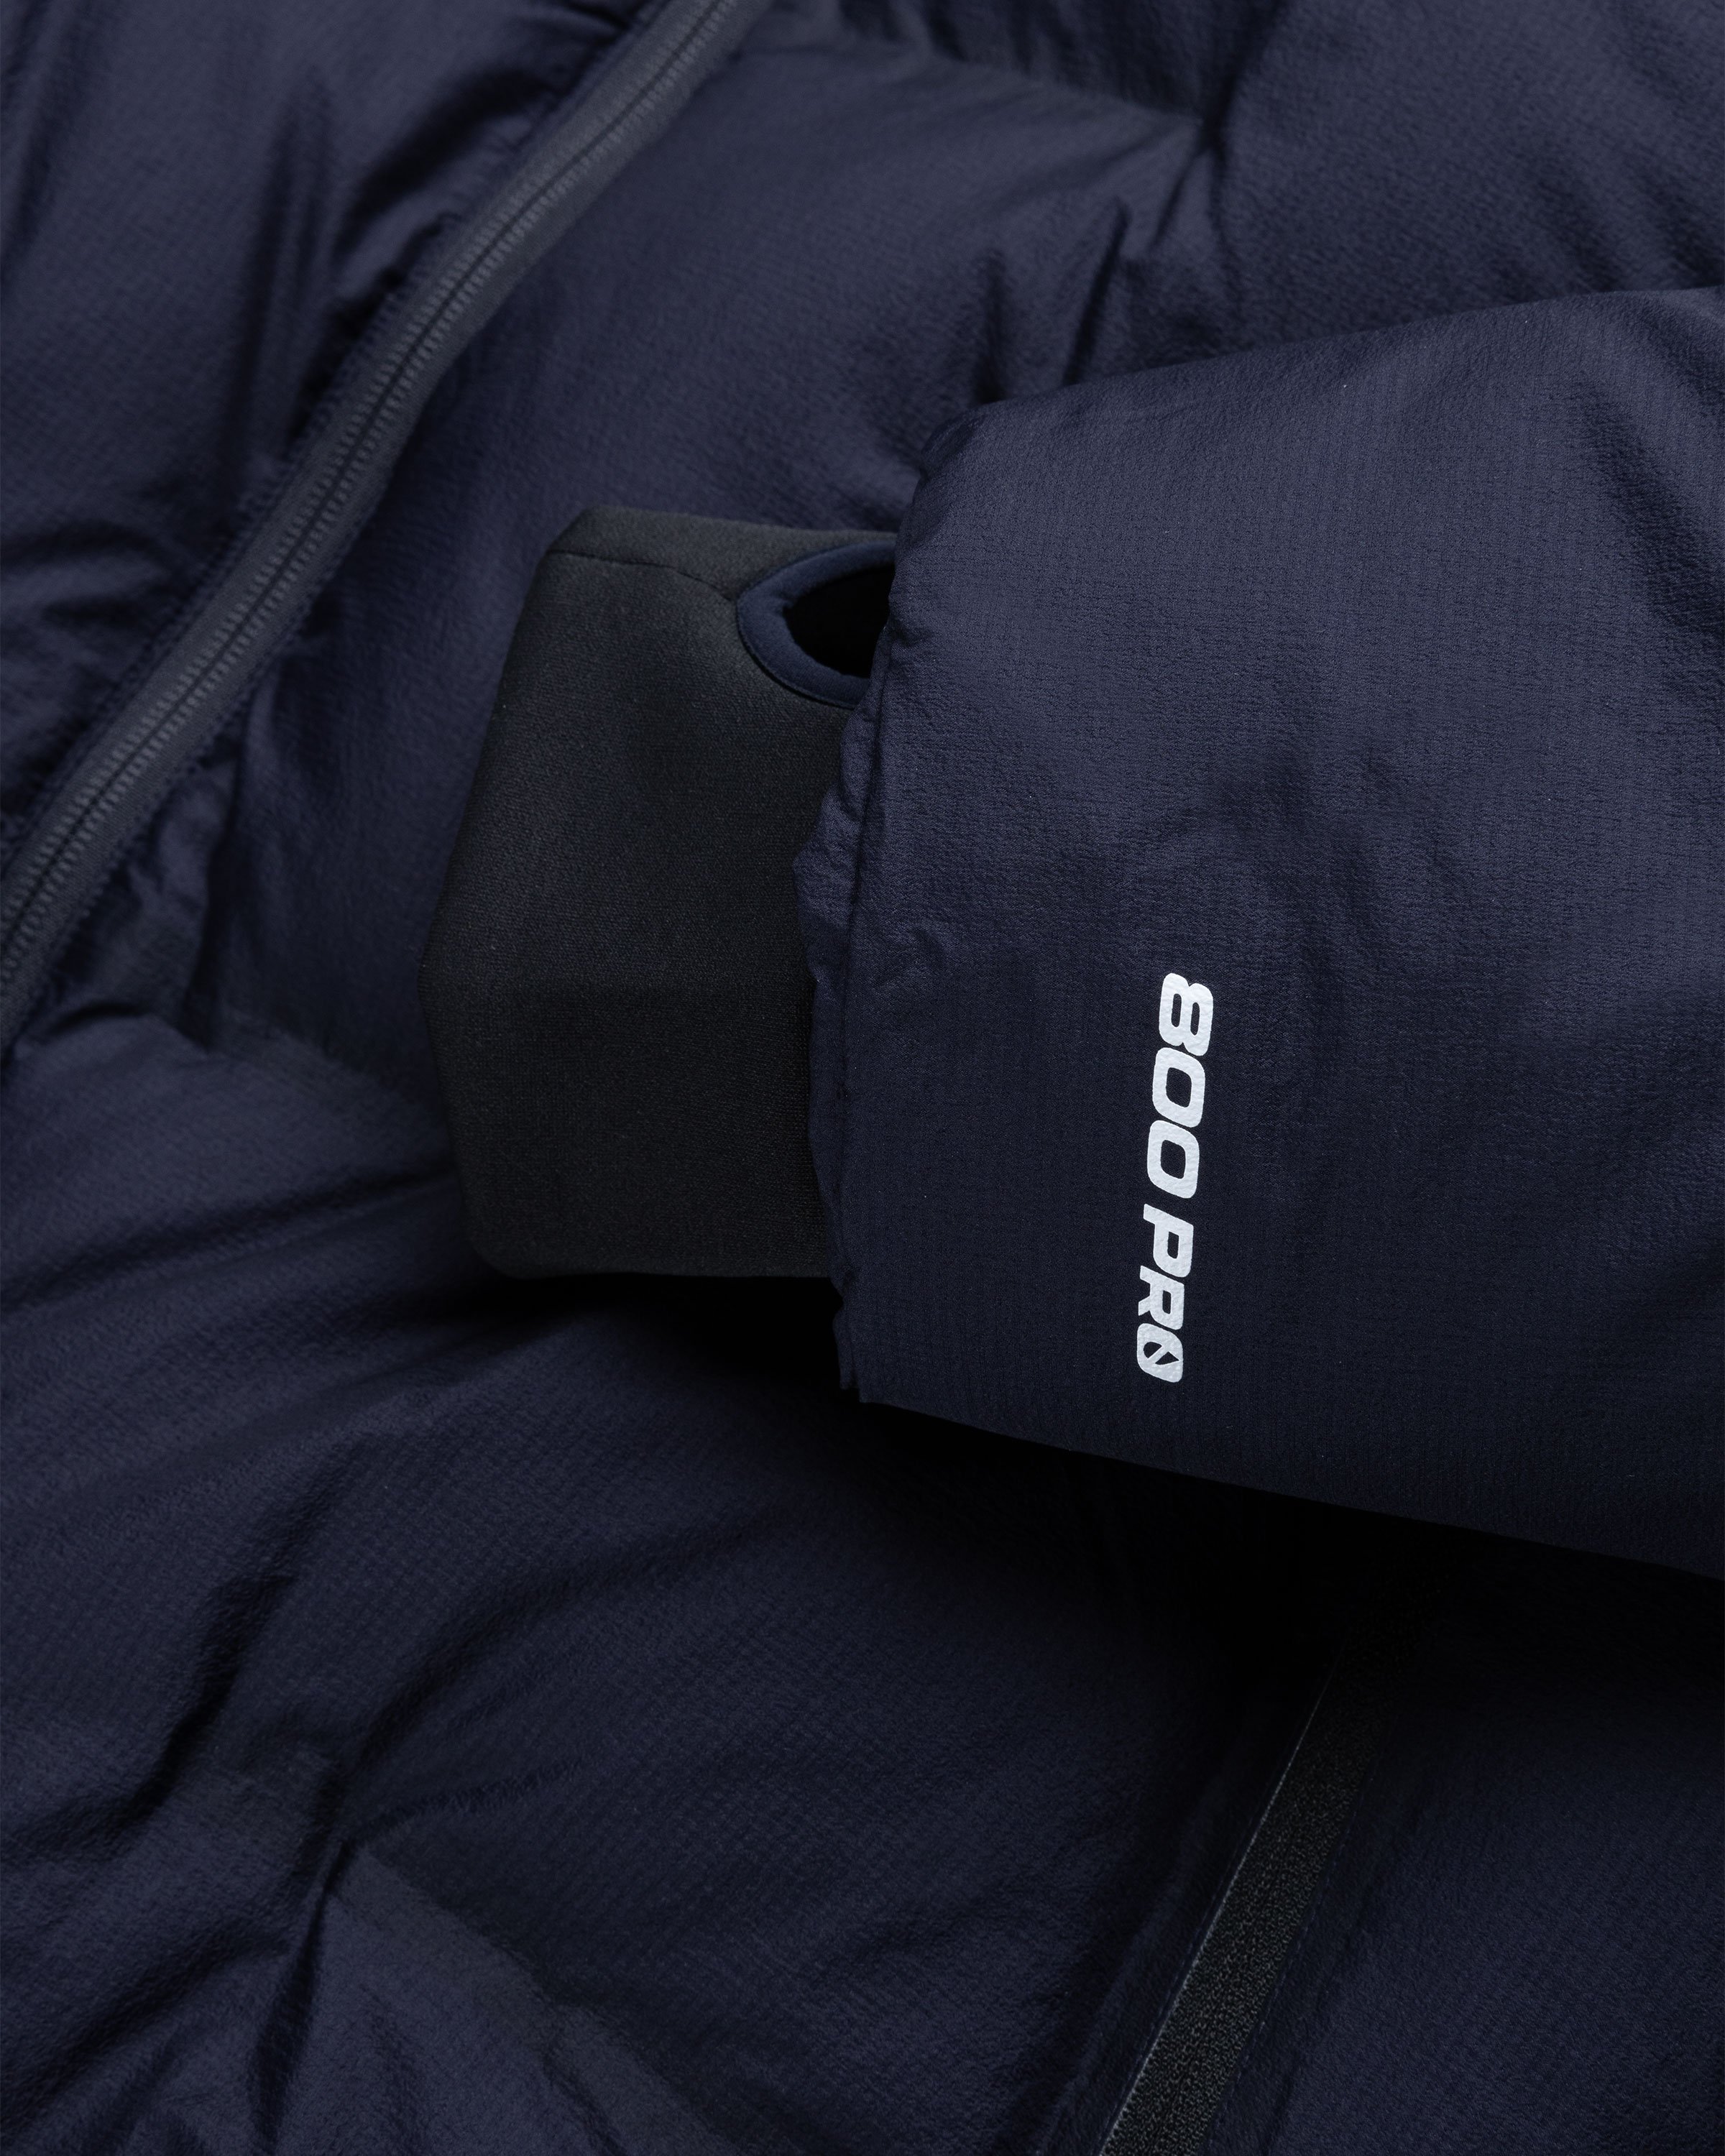 The North Face x UNDERCOVER - Soukuu Cloud Down Nupste Parka Black/Navy - Clothing - Multi - Image 5